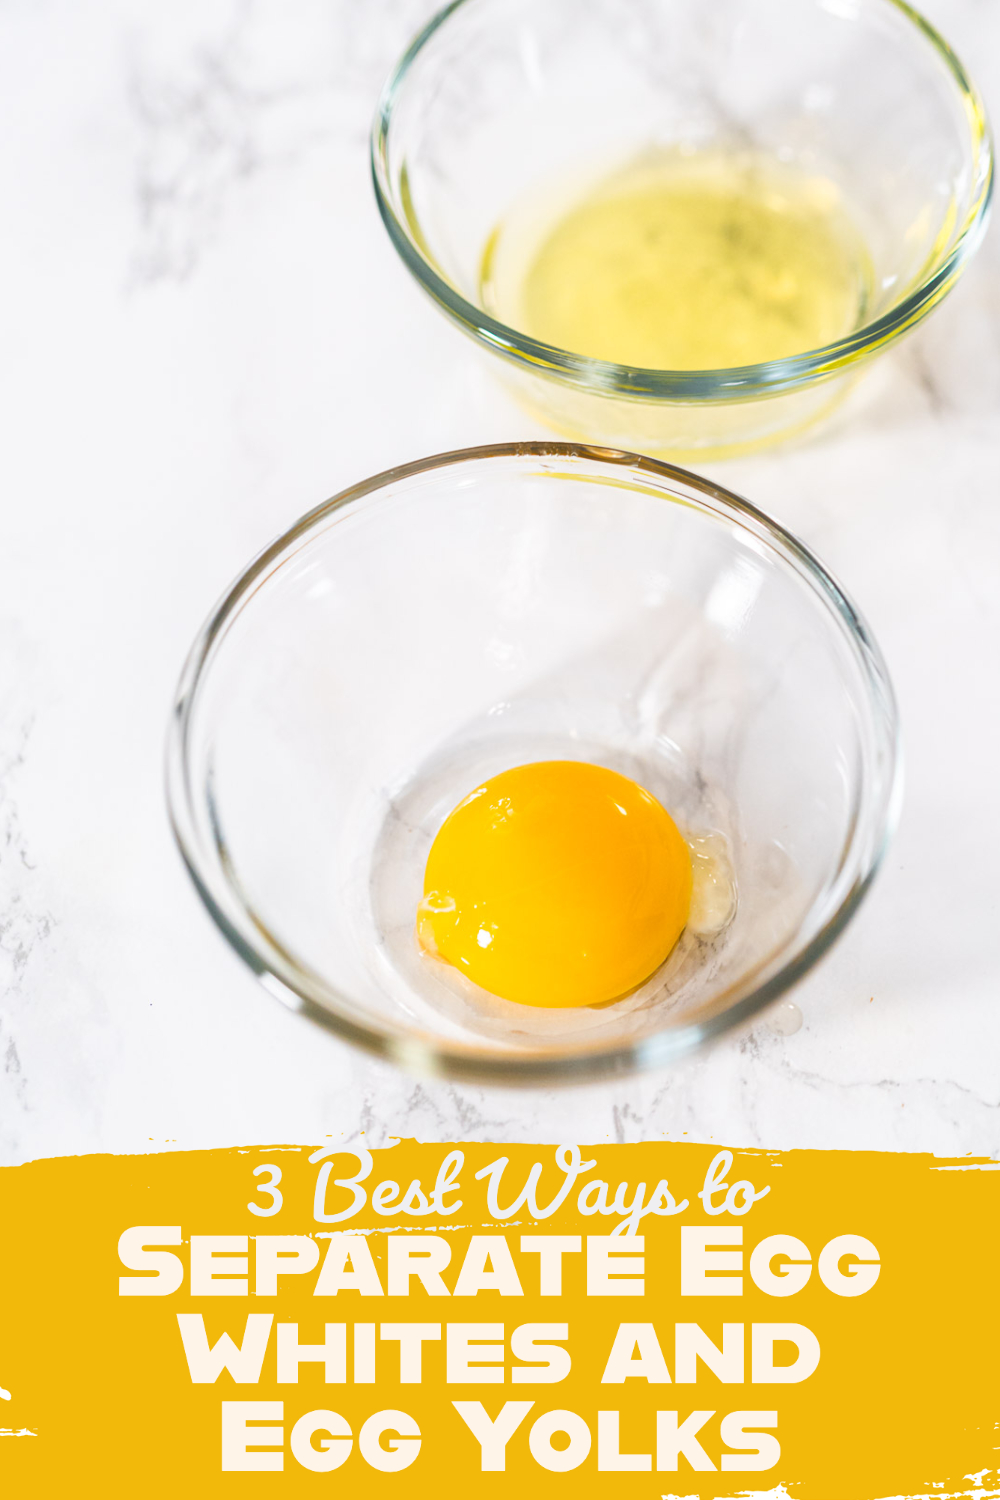 3 Best Ways to Separate Egg Whites and Egg Yolks